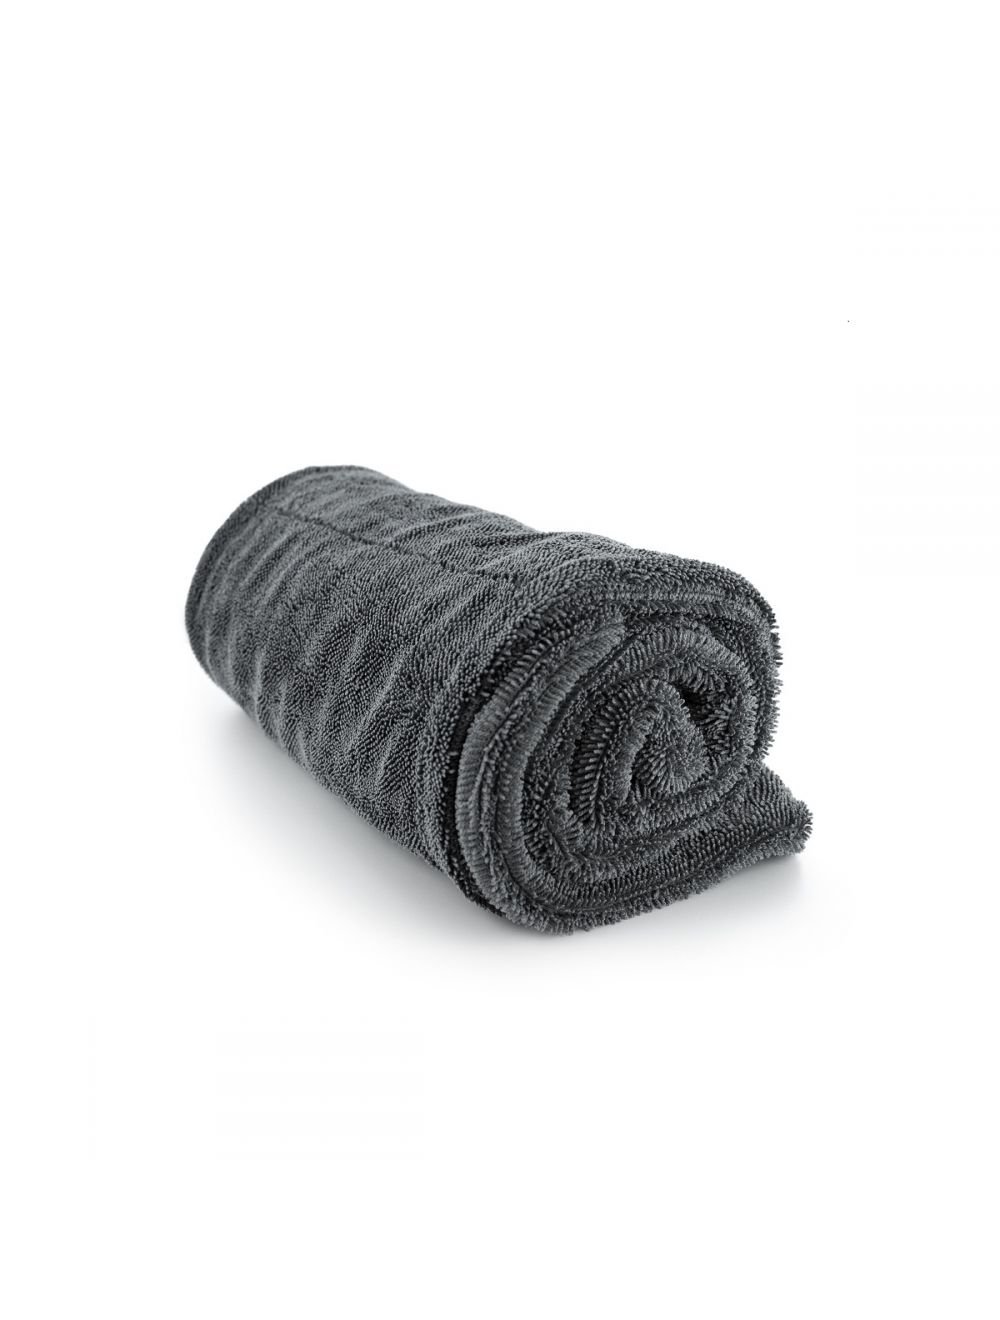 Twisted Pile Drying Towel Alien Magic Luxembourg